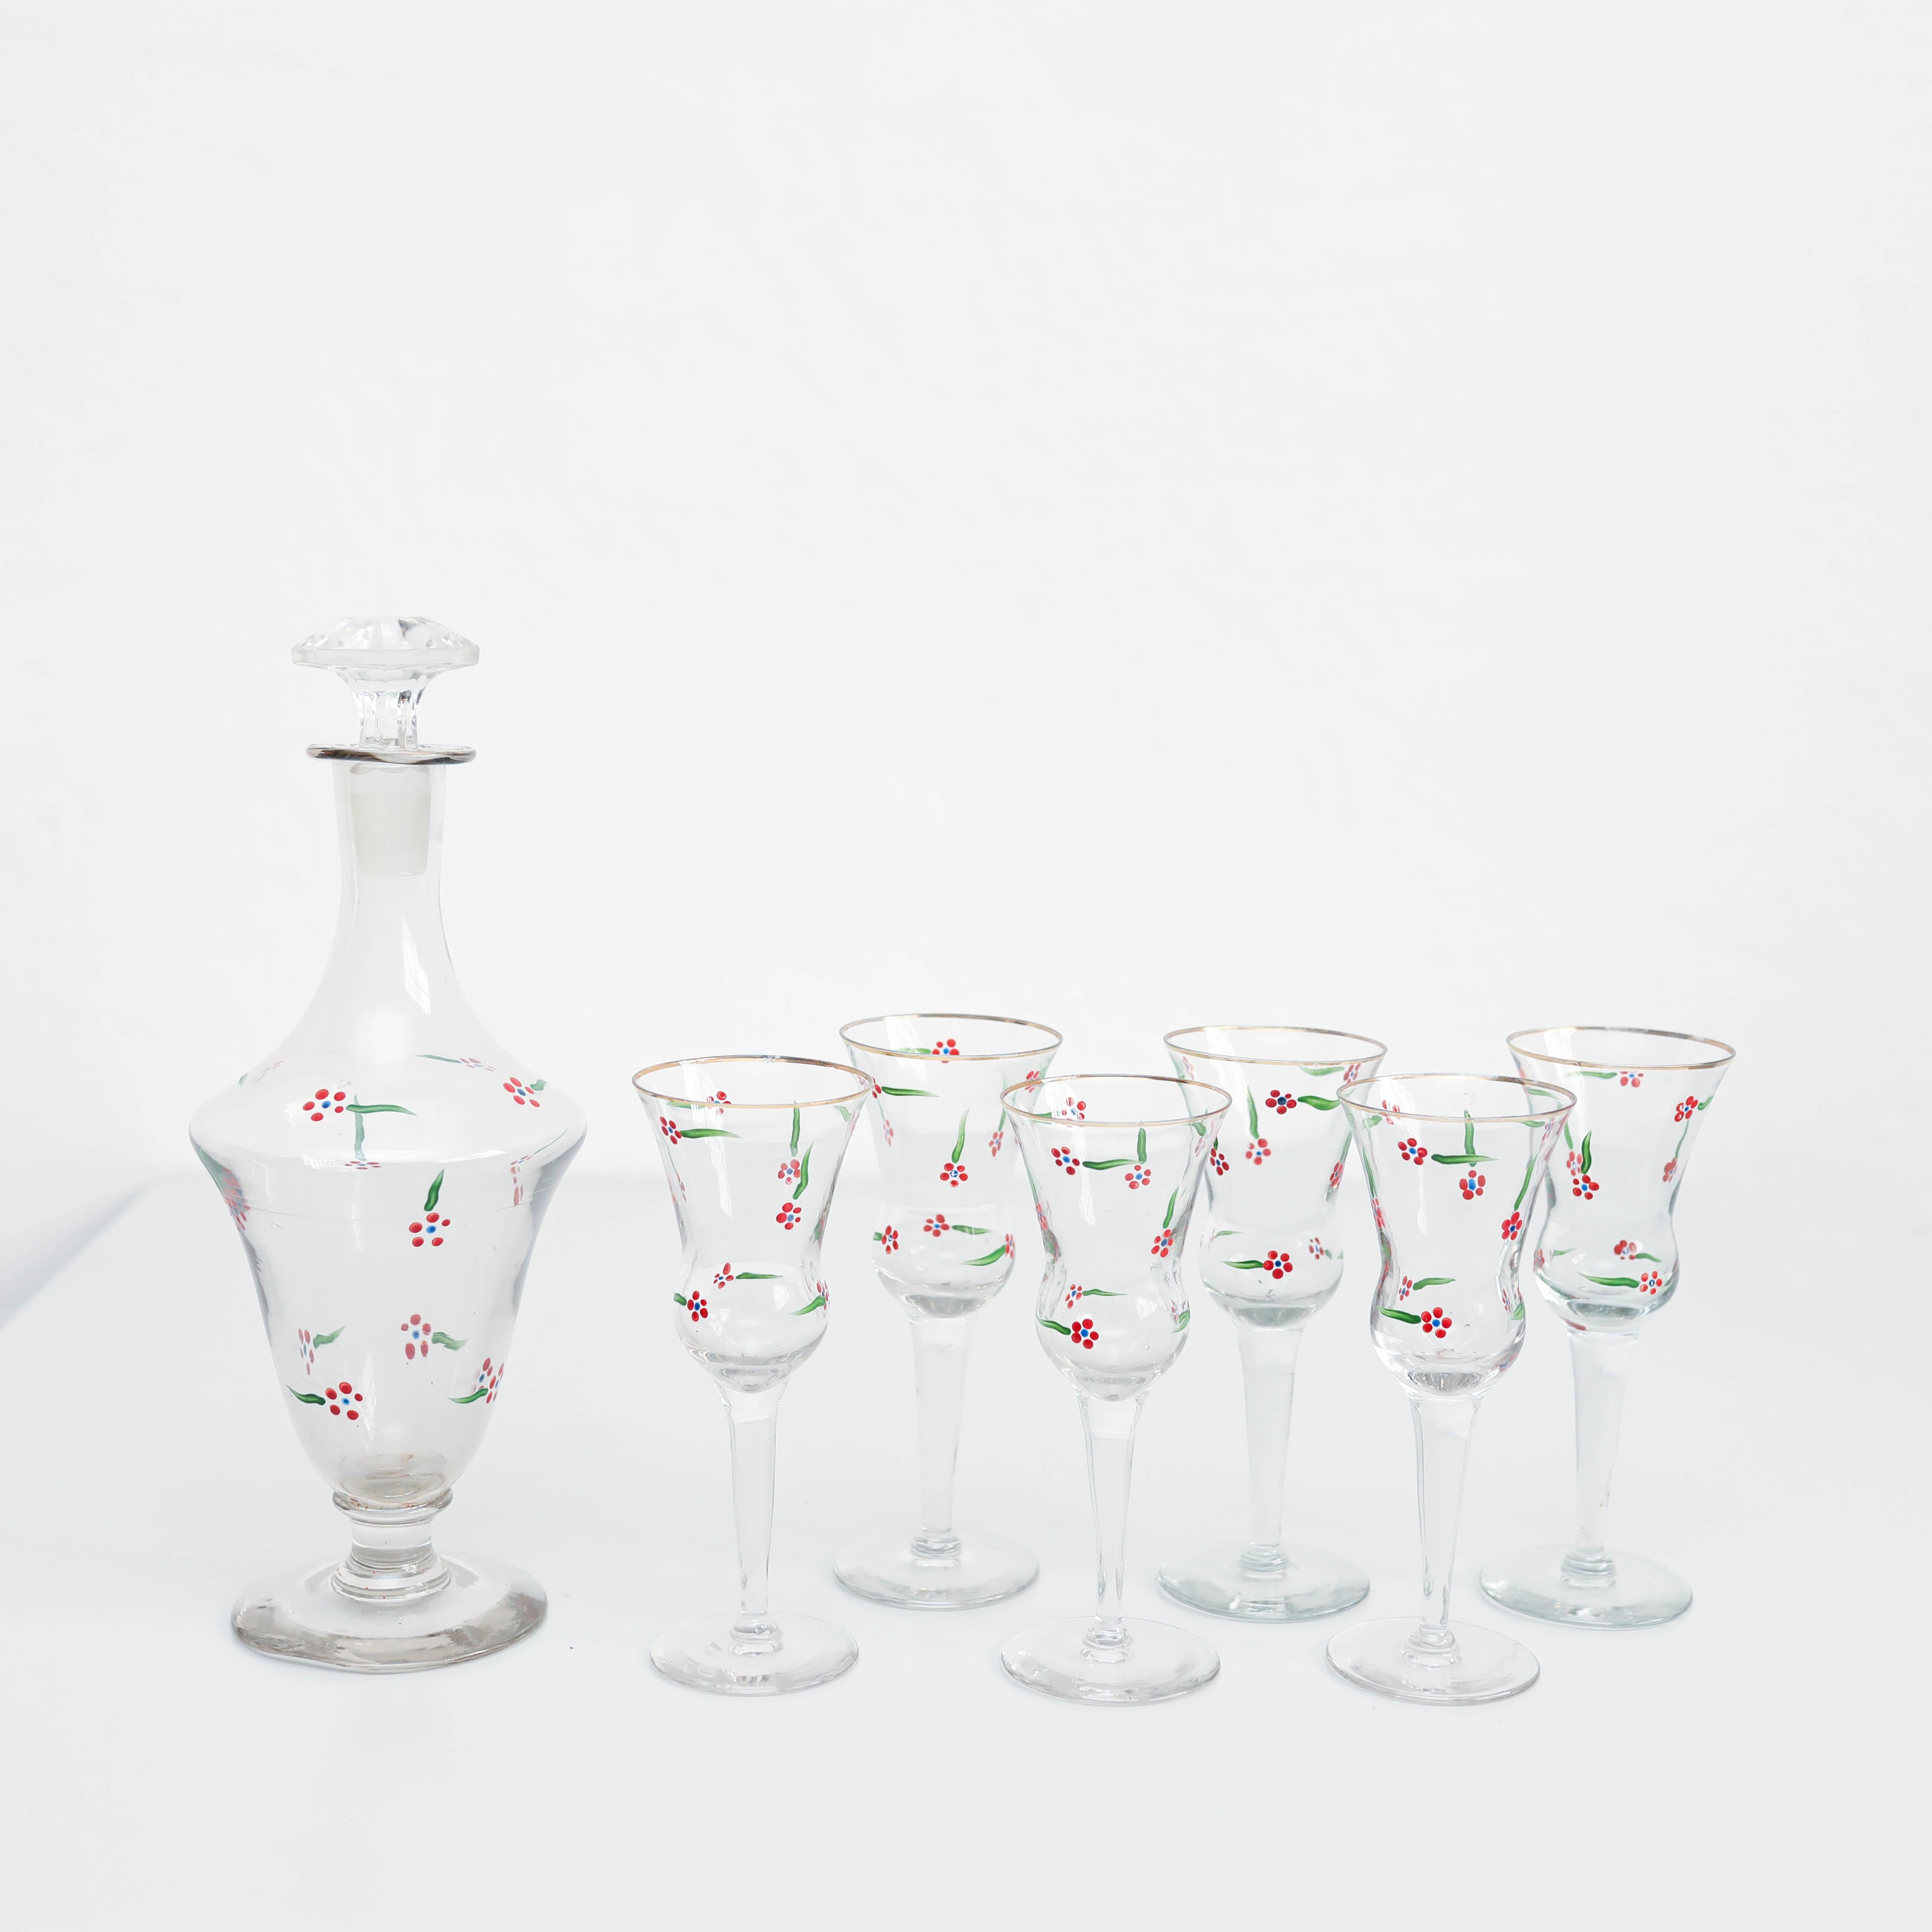  Set of 6 Antique hand painted Glass Wine Cups and Glass Vase.

Made by unknown manufacturer in Spain, circa 1940.

In original condition, with minor wear consistent with age and use, preserving a beautiful